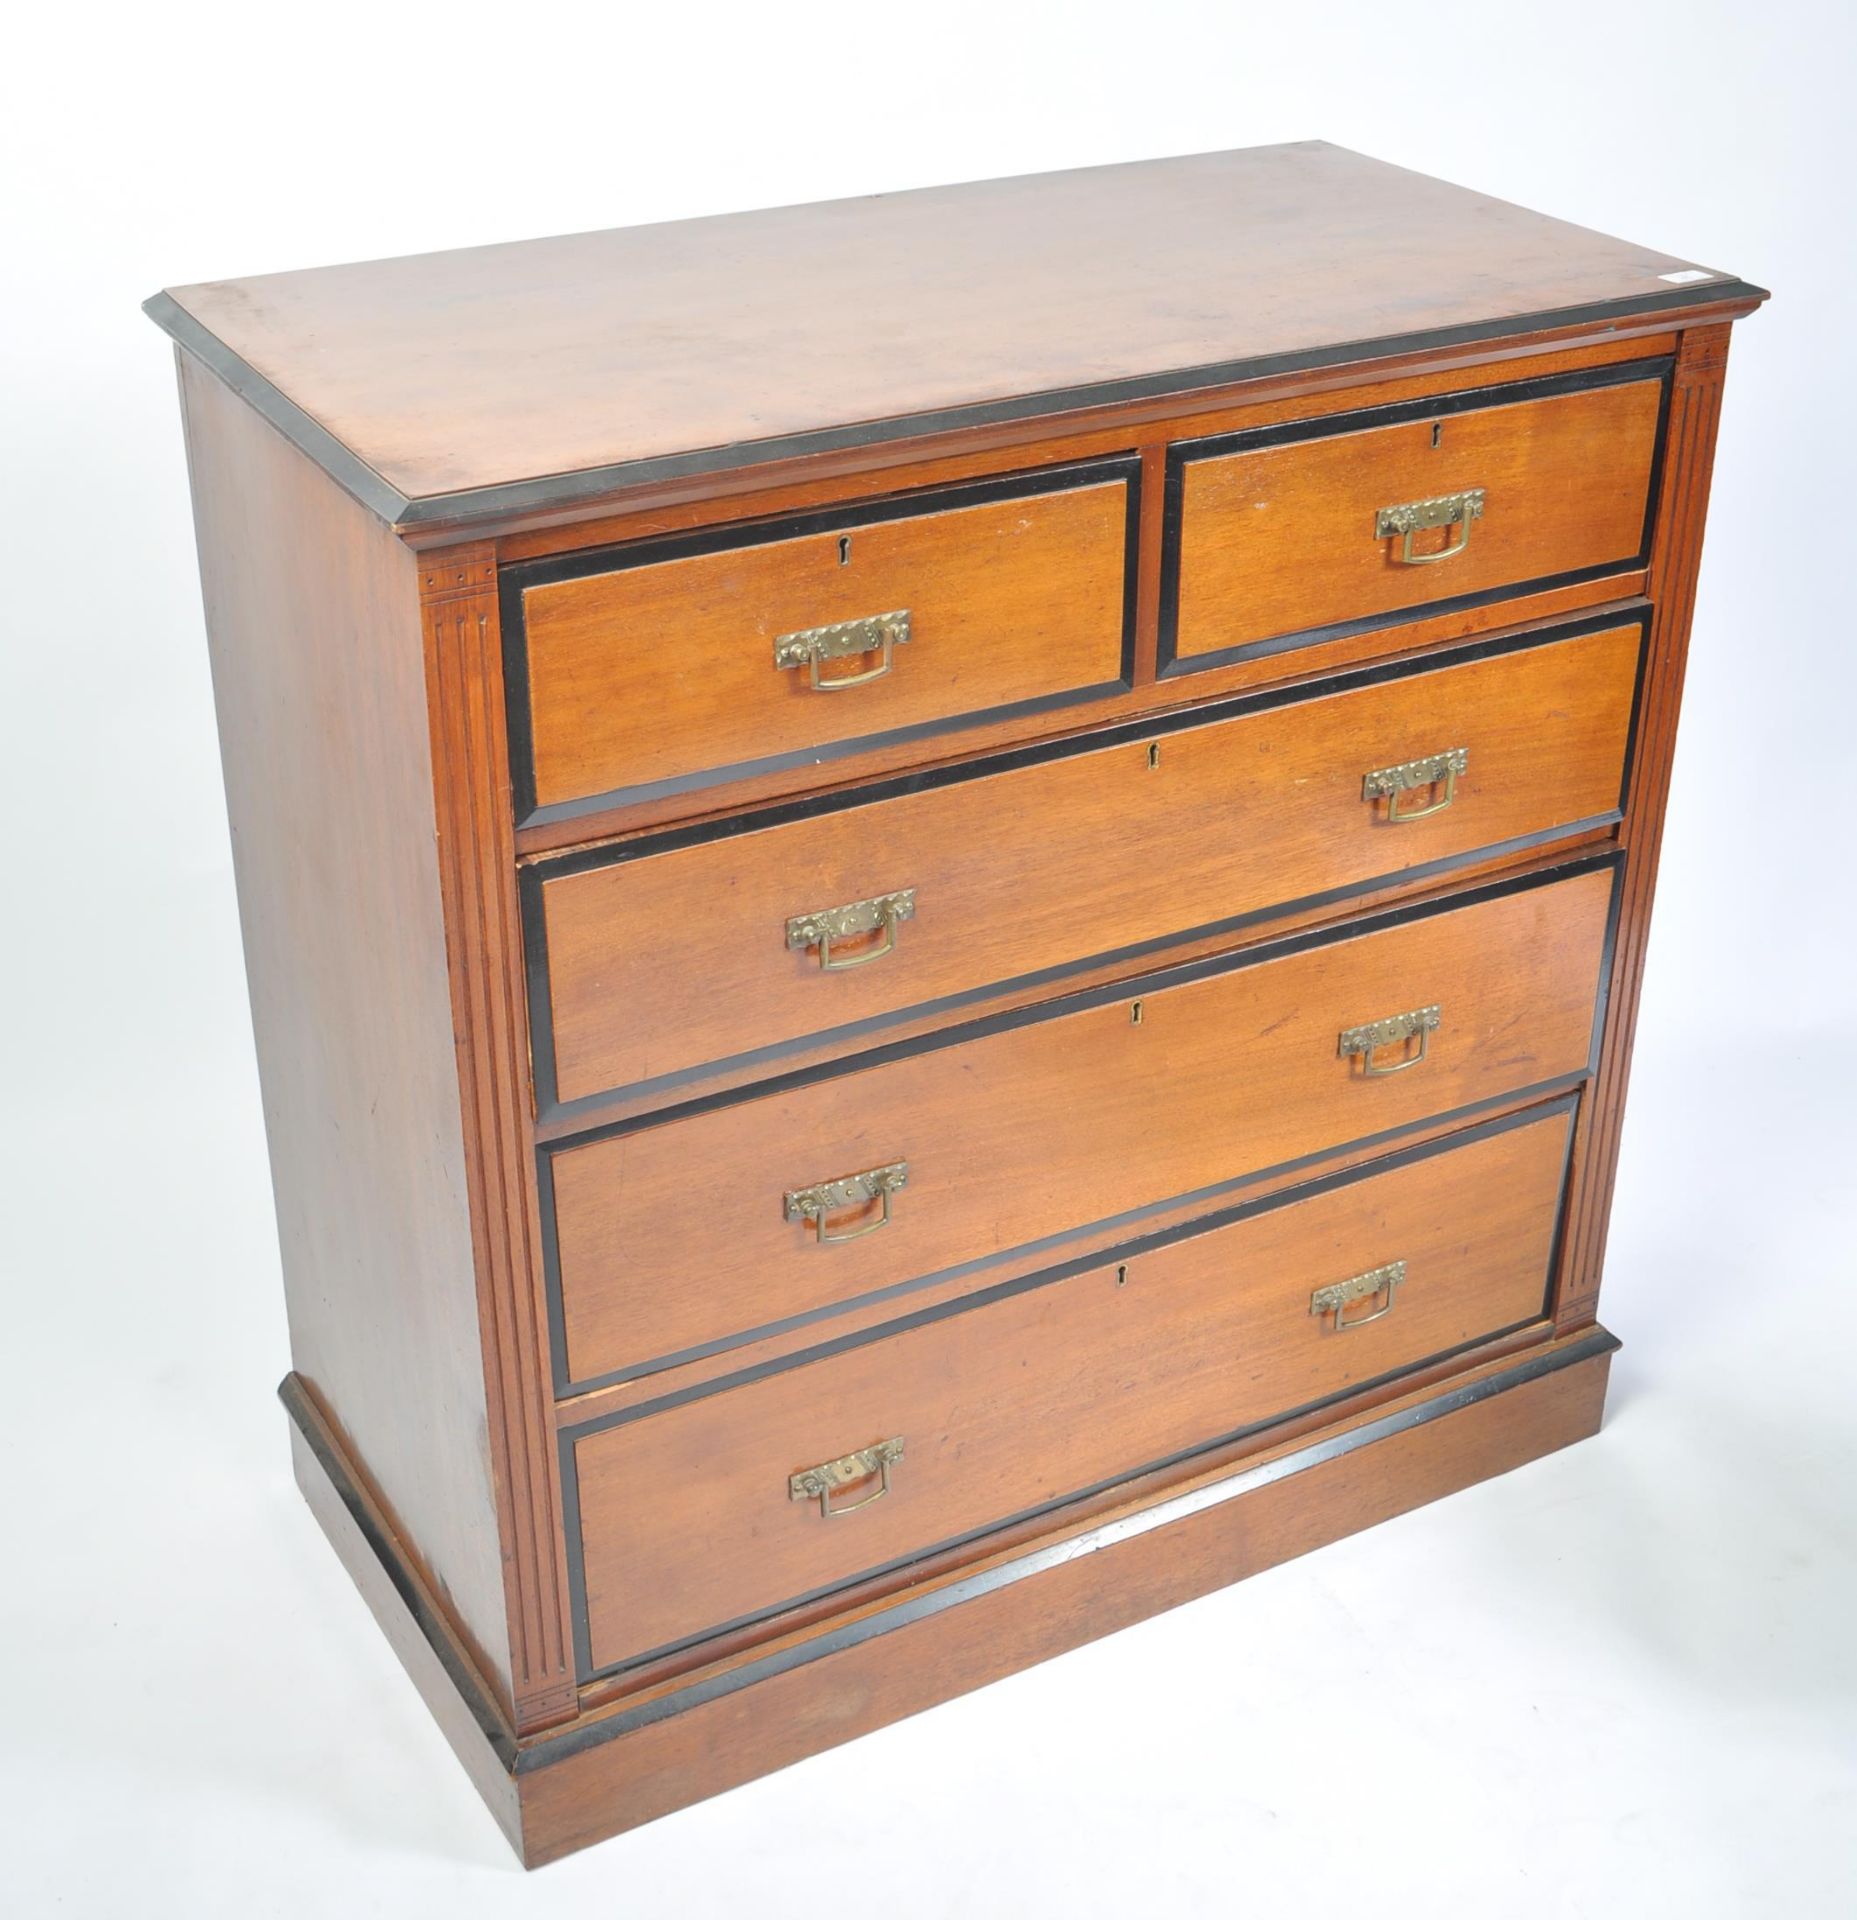 MAPLE & CO LONDON 19TH CENTURY MAHOGANY CHEST OF DRAWERS - Image 2 of 5